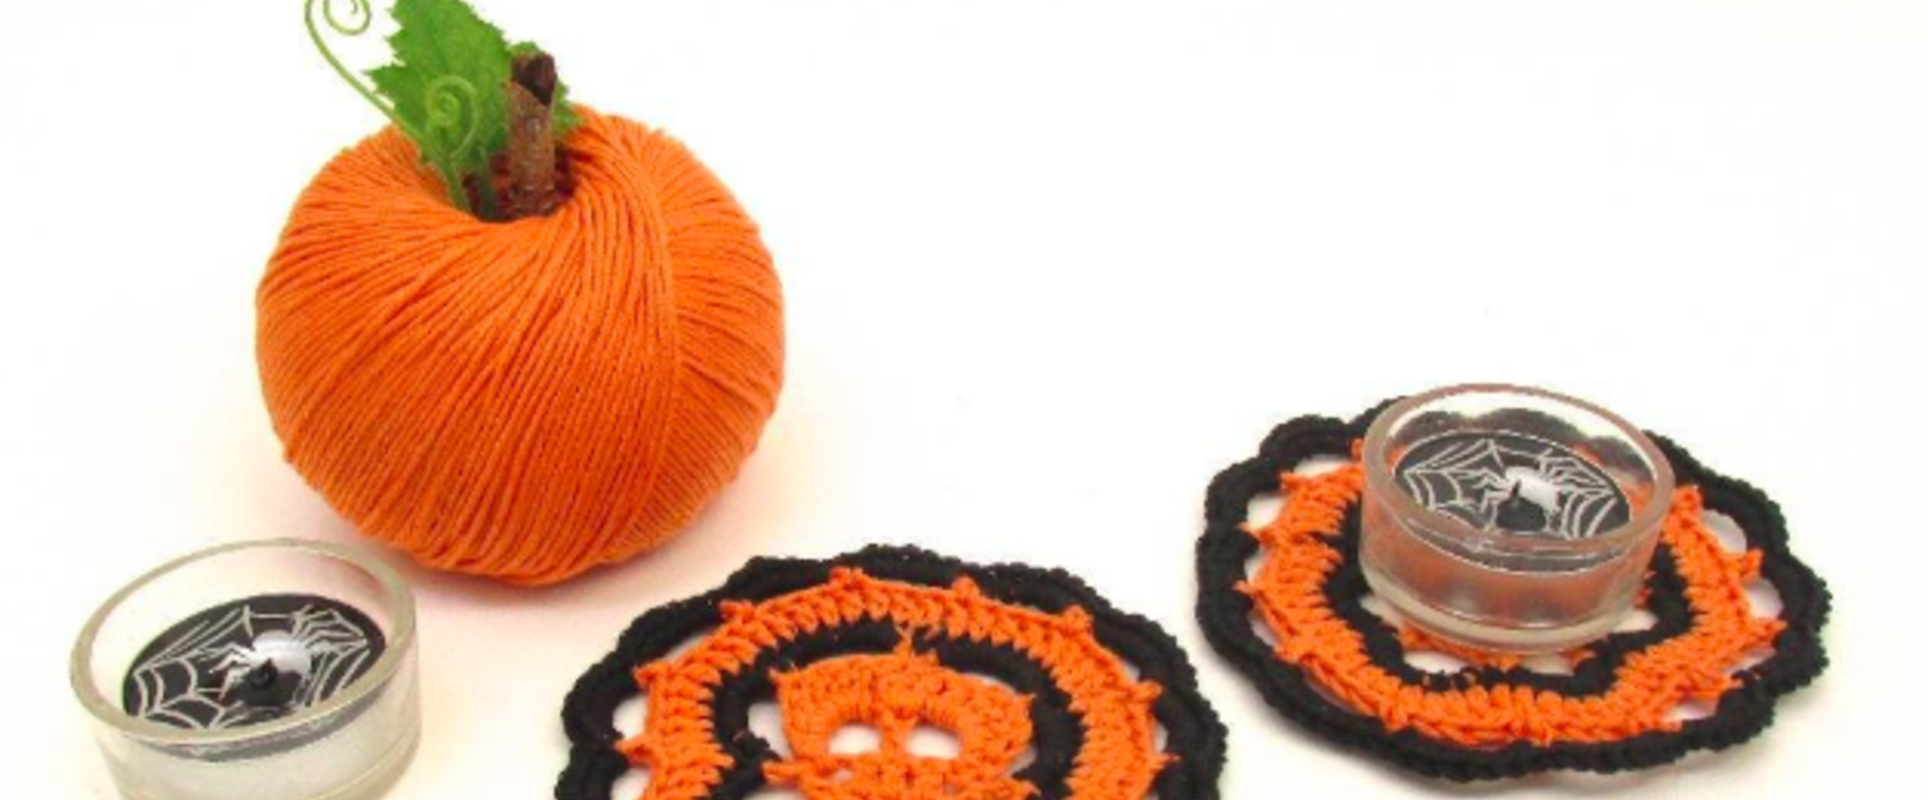 Halloween Crochet Patterns 10 Free And Frightening Halloween Crochet Patterns Lovecrochet